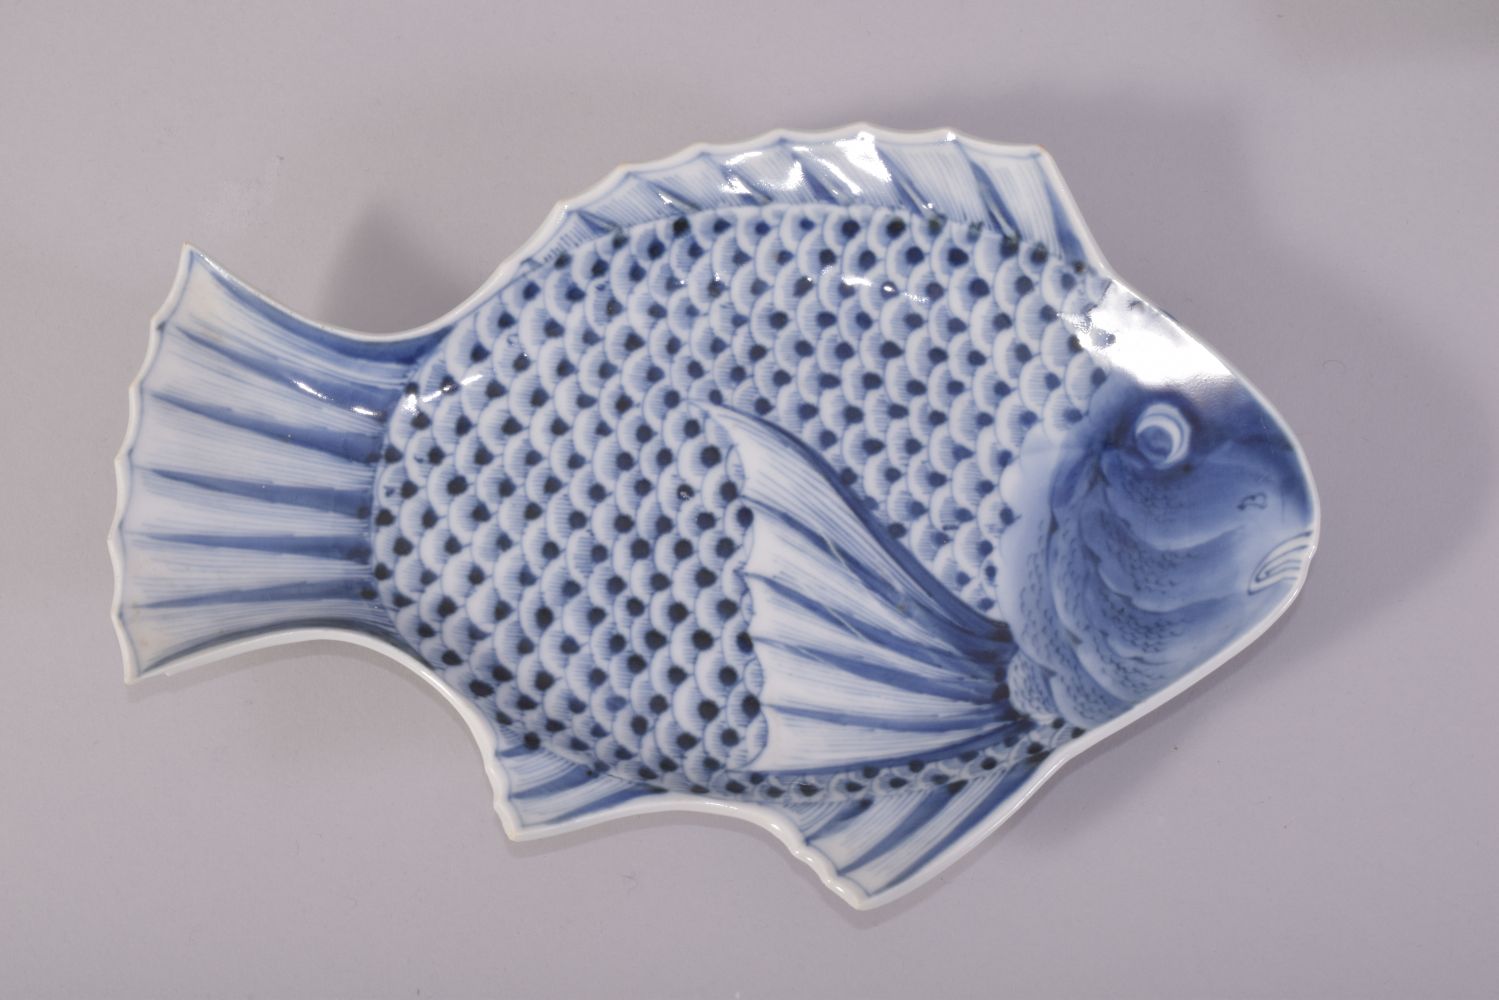 SIX CHINESE BLUE AND WHITE PORCELAIN FISH FORM DISHES, the dishes painted as fish, each dish with - Image 2 of 4